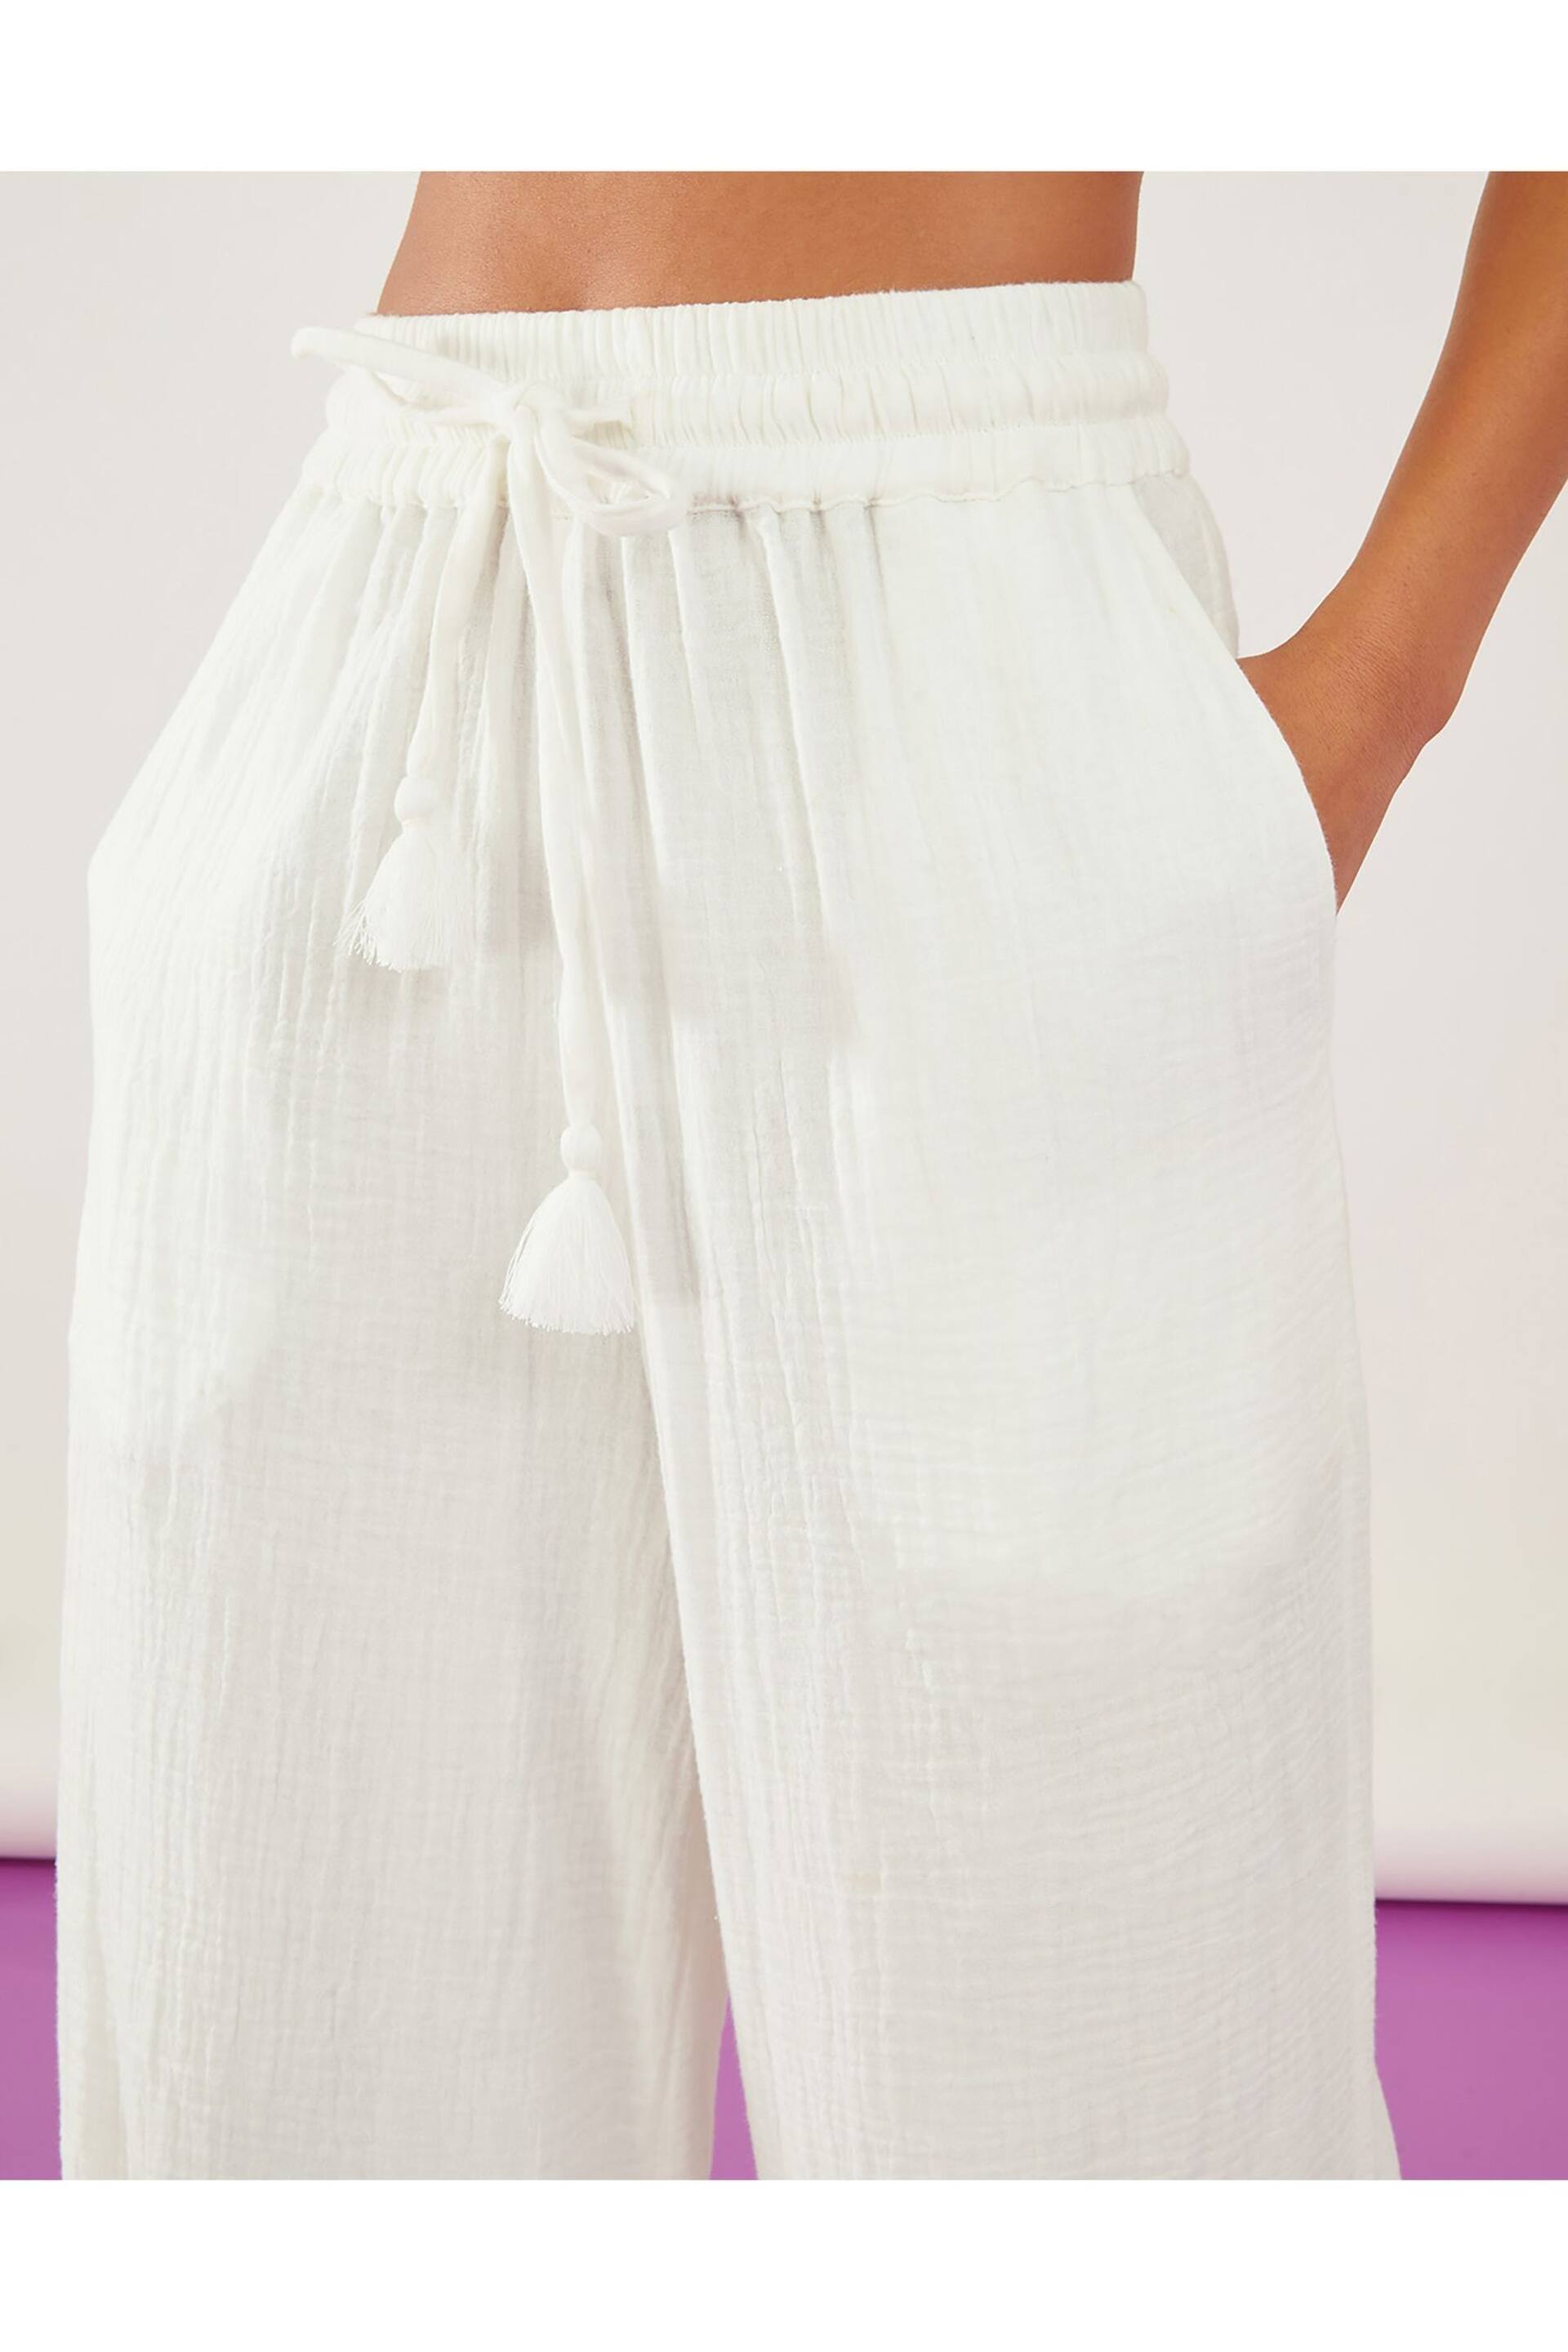 Accessorize White Crinkle Beach Trousers - Image 3 of 3